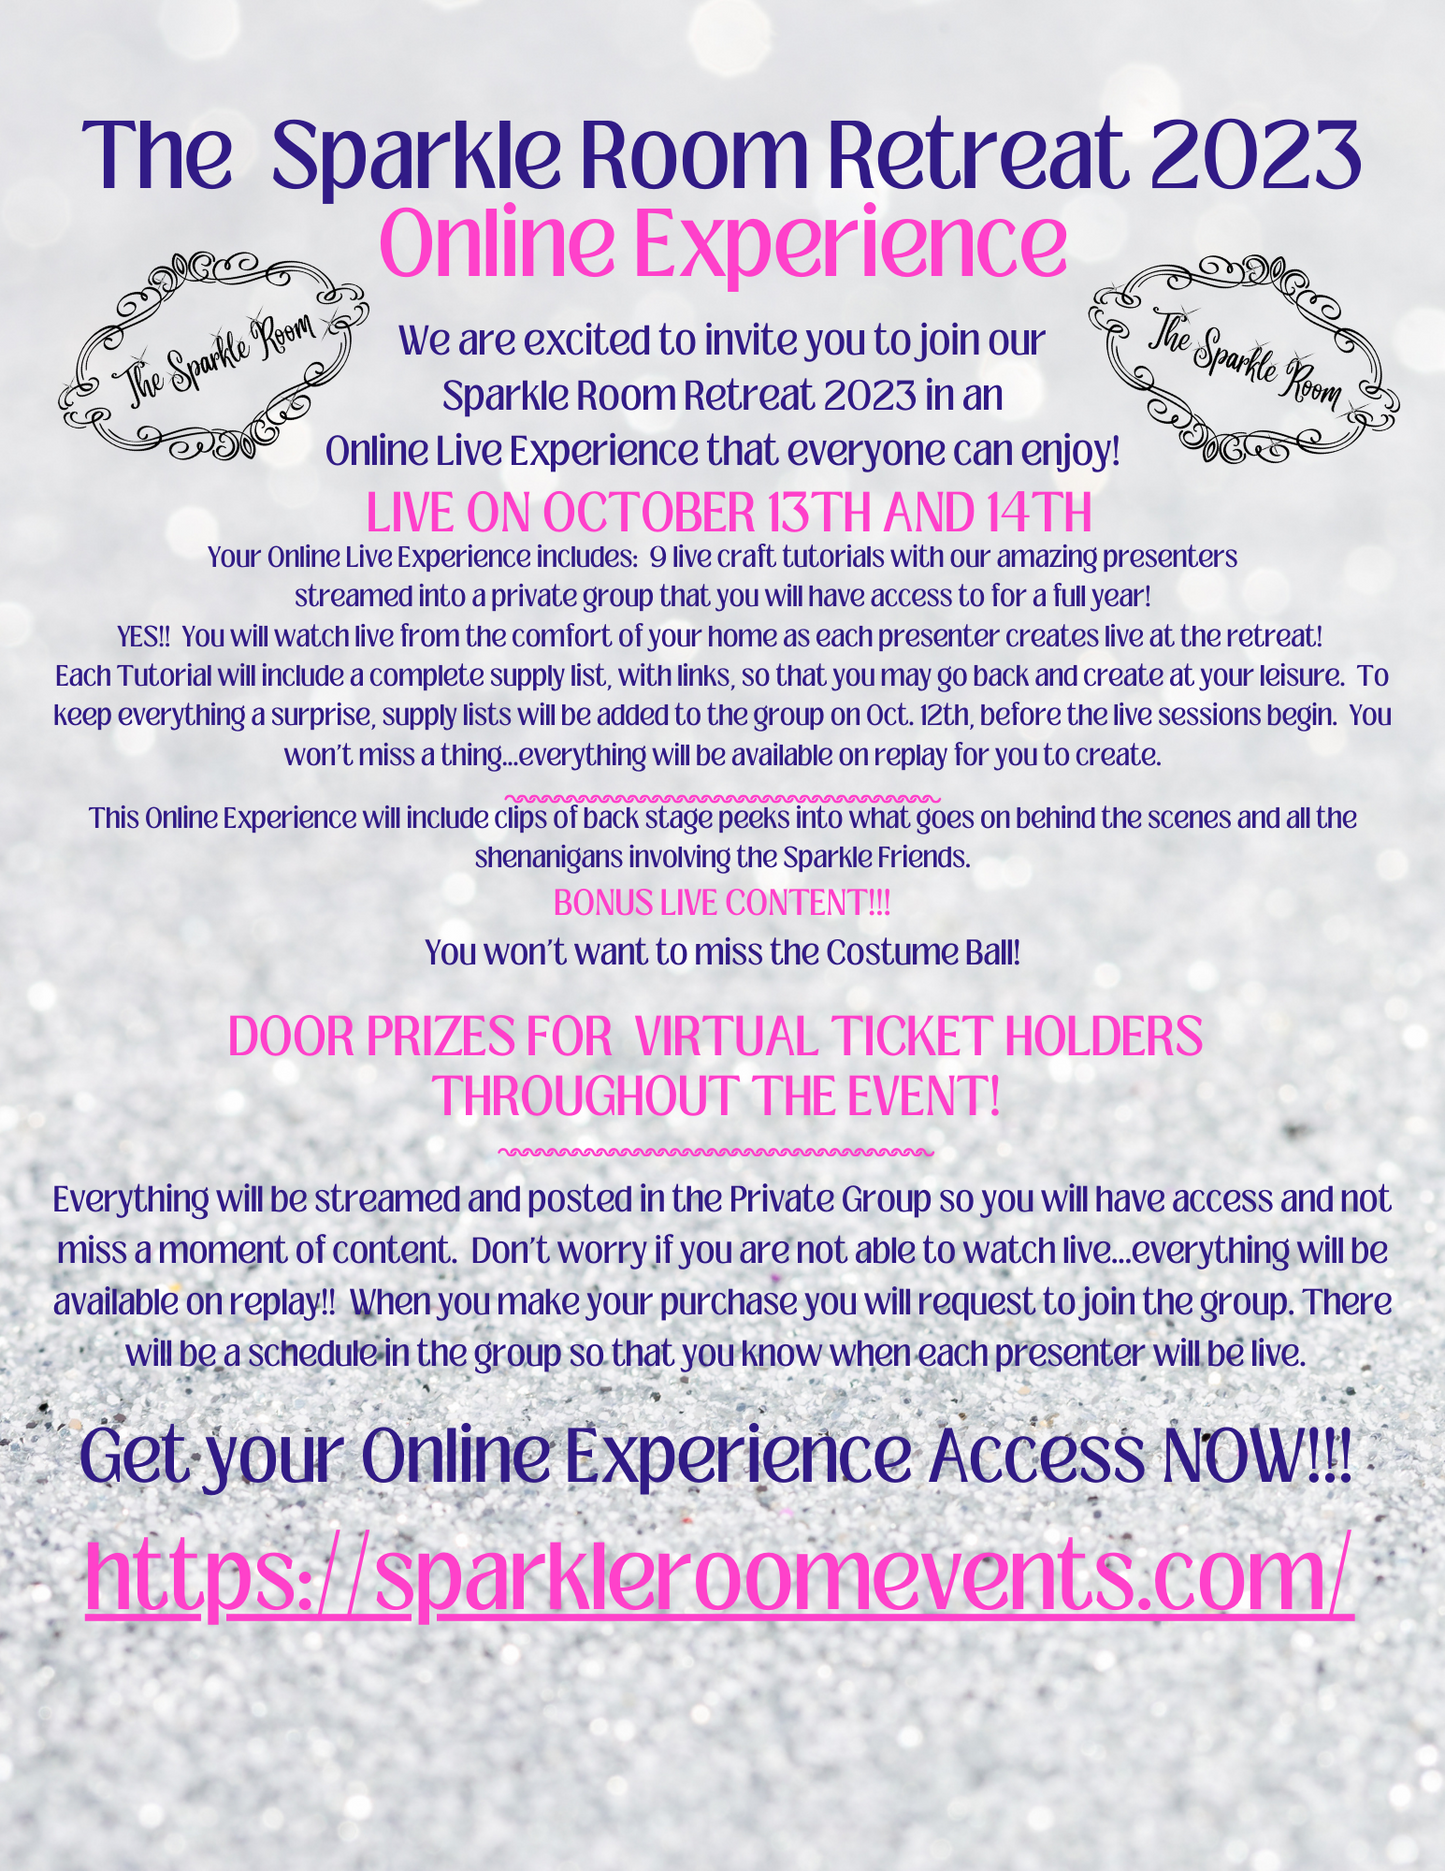 The Sparkle Room Retreat 2023 Online Experience